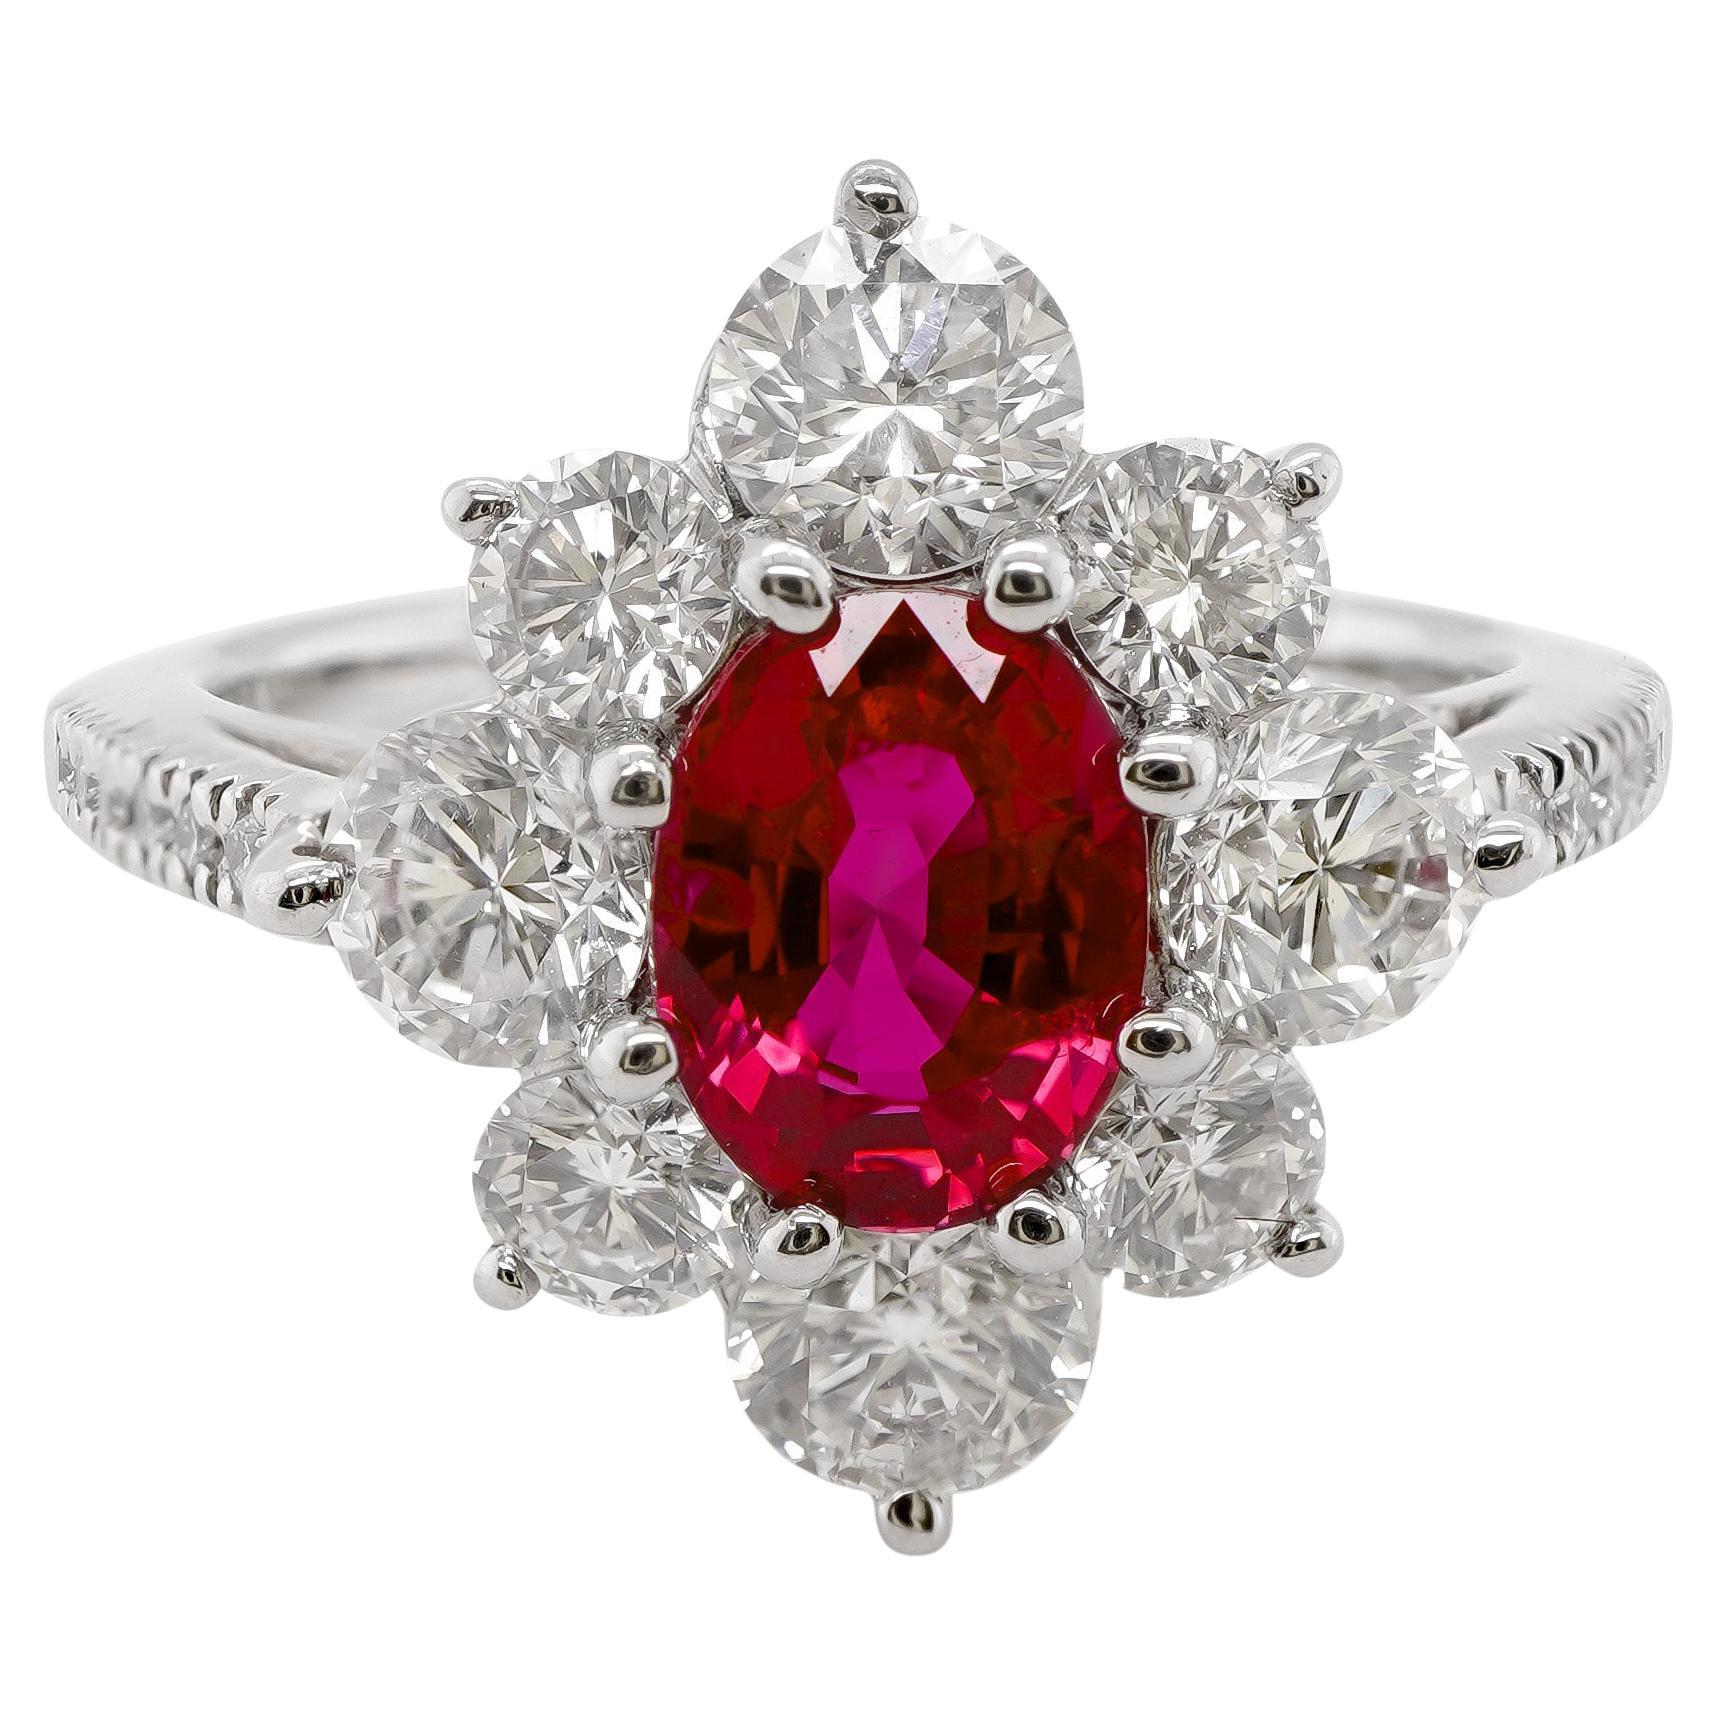 Certified 1.38 Carat Electric Red Ruby 1.76 Carat White Diamond Solitaire Ring